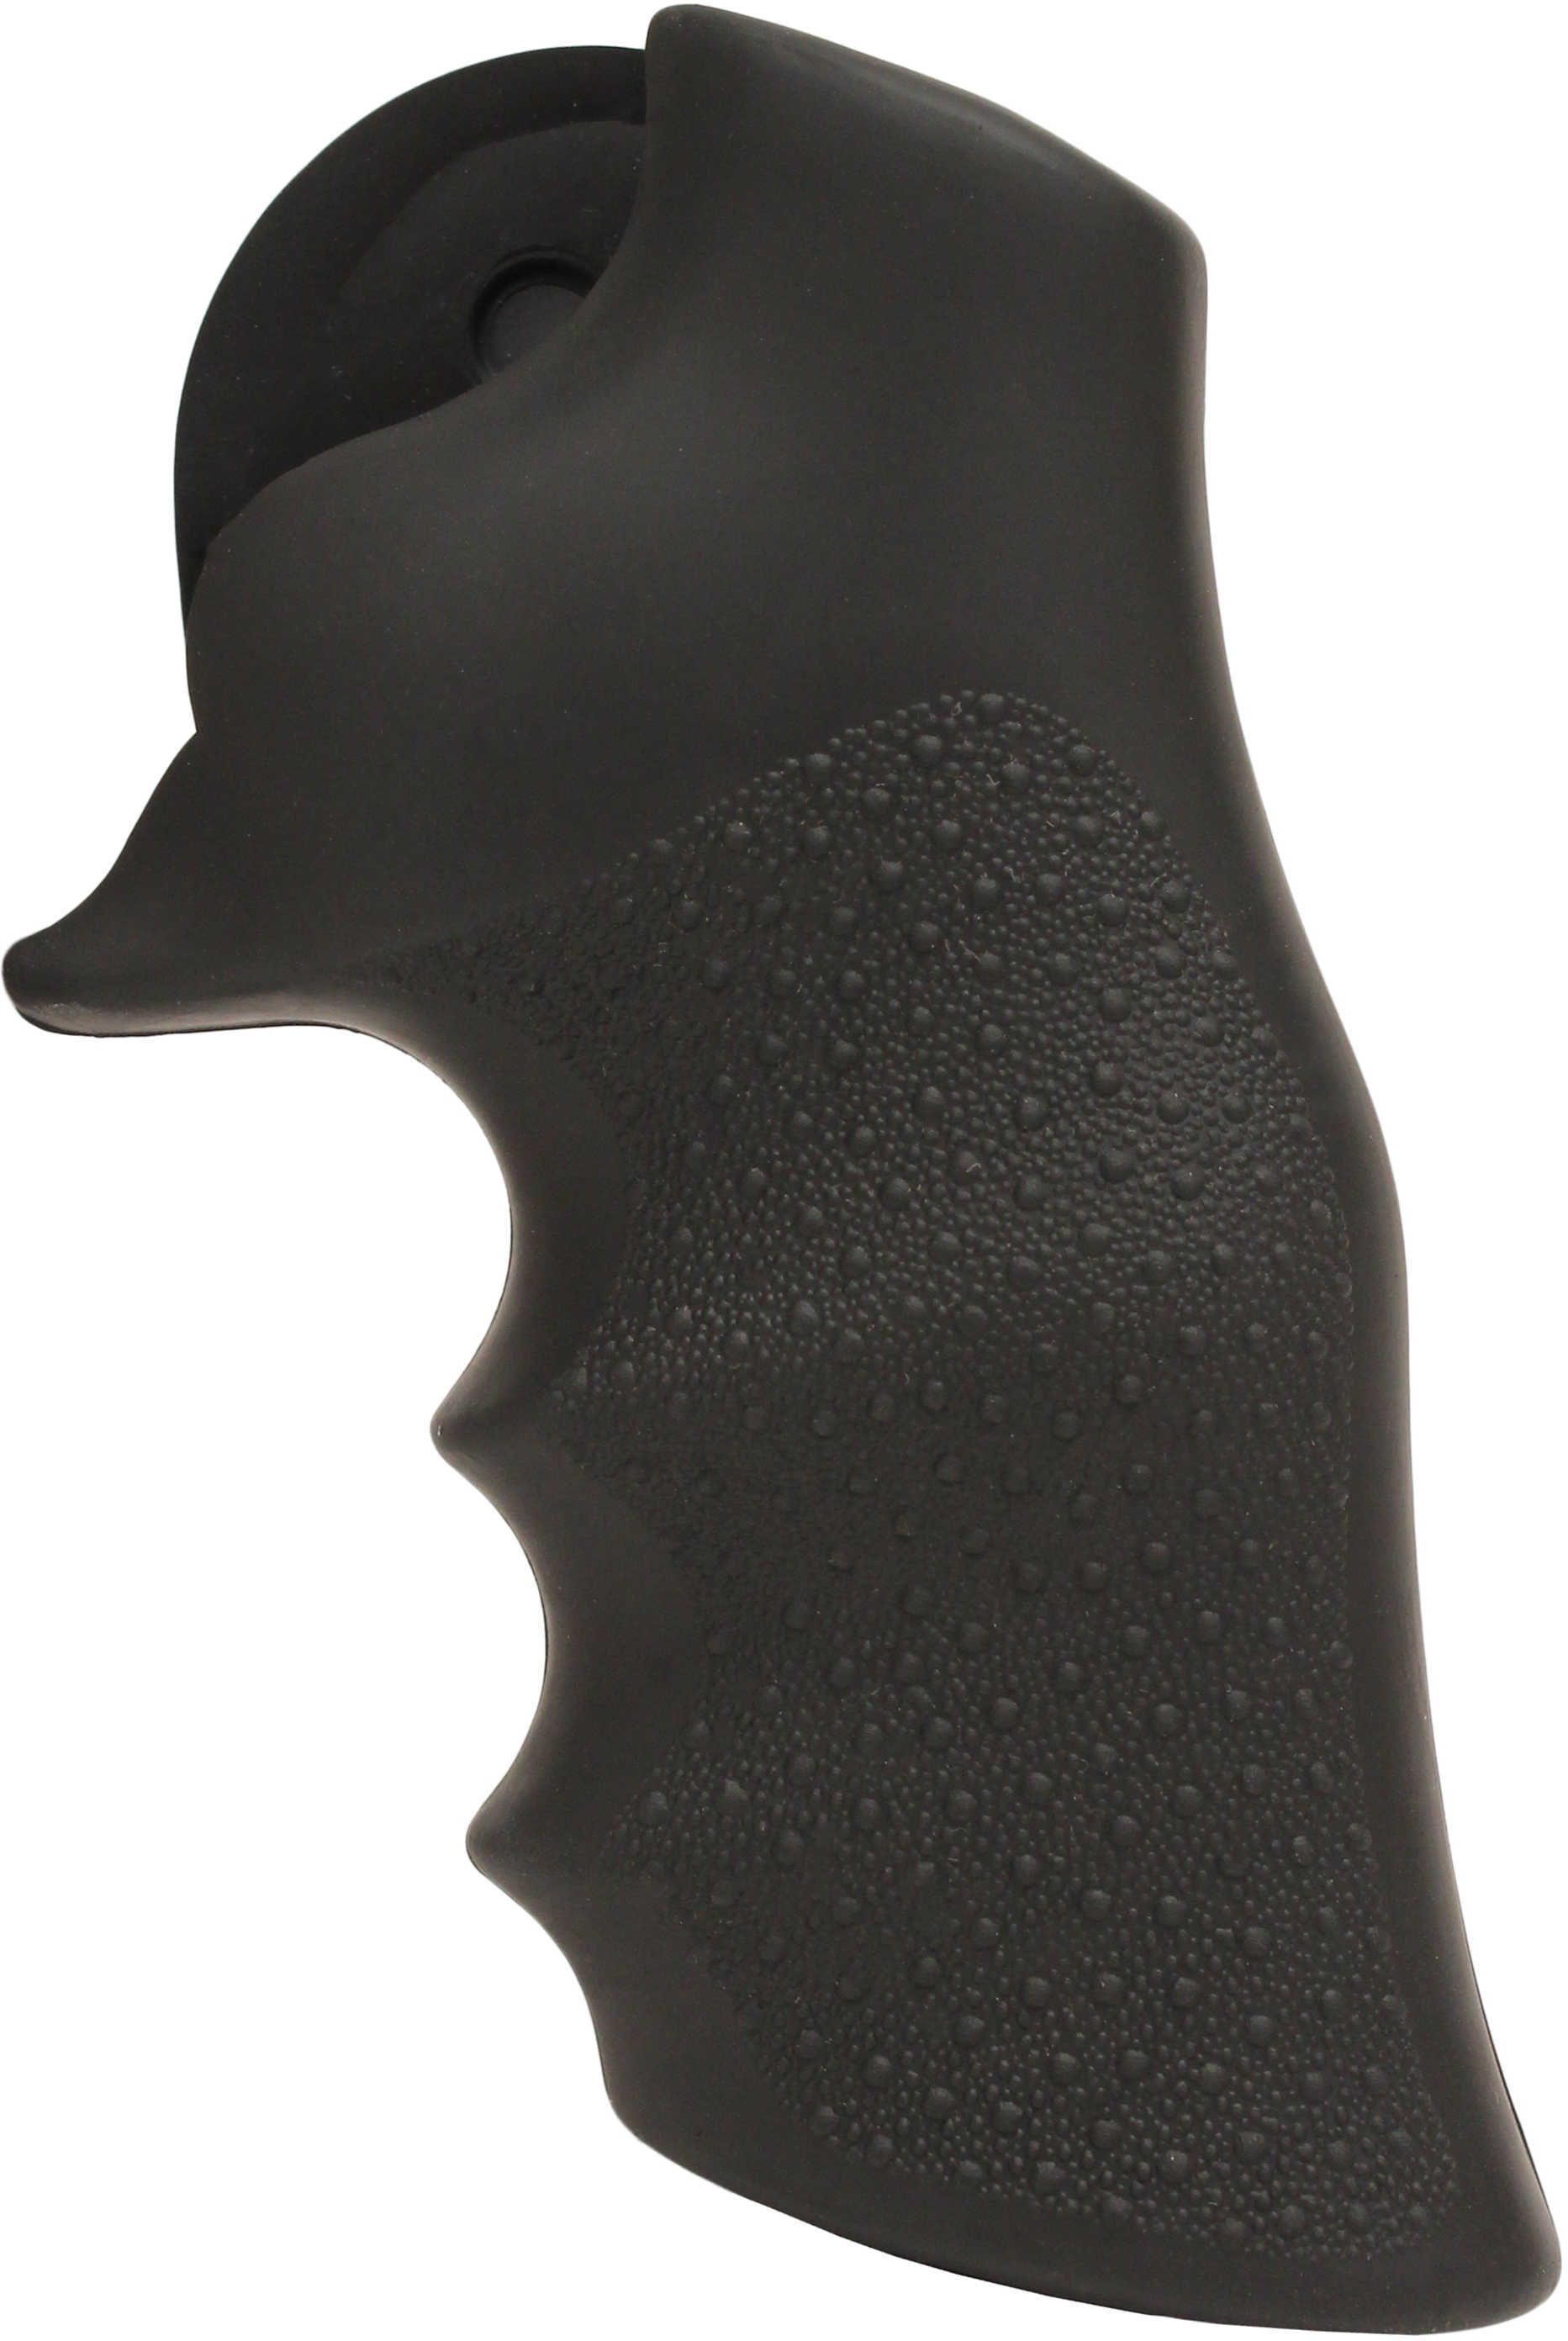 Hogue 58000 Monogrip with Finger Grooves Grip Dan Wesson 44/357 Rubber Black